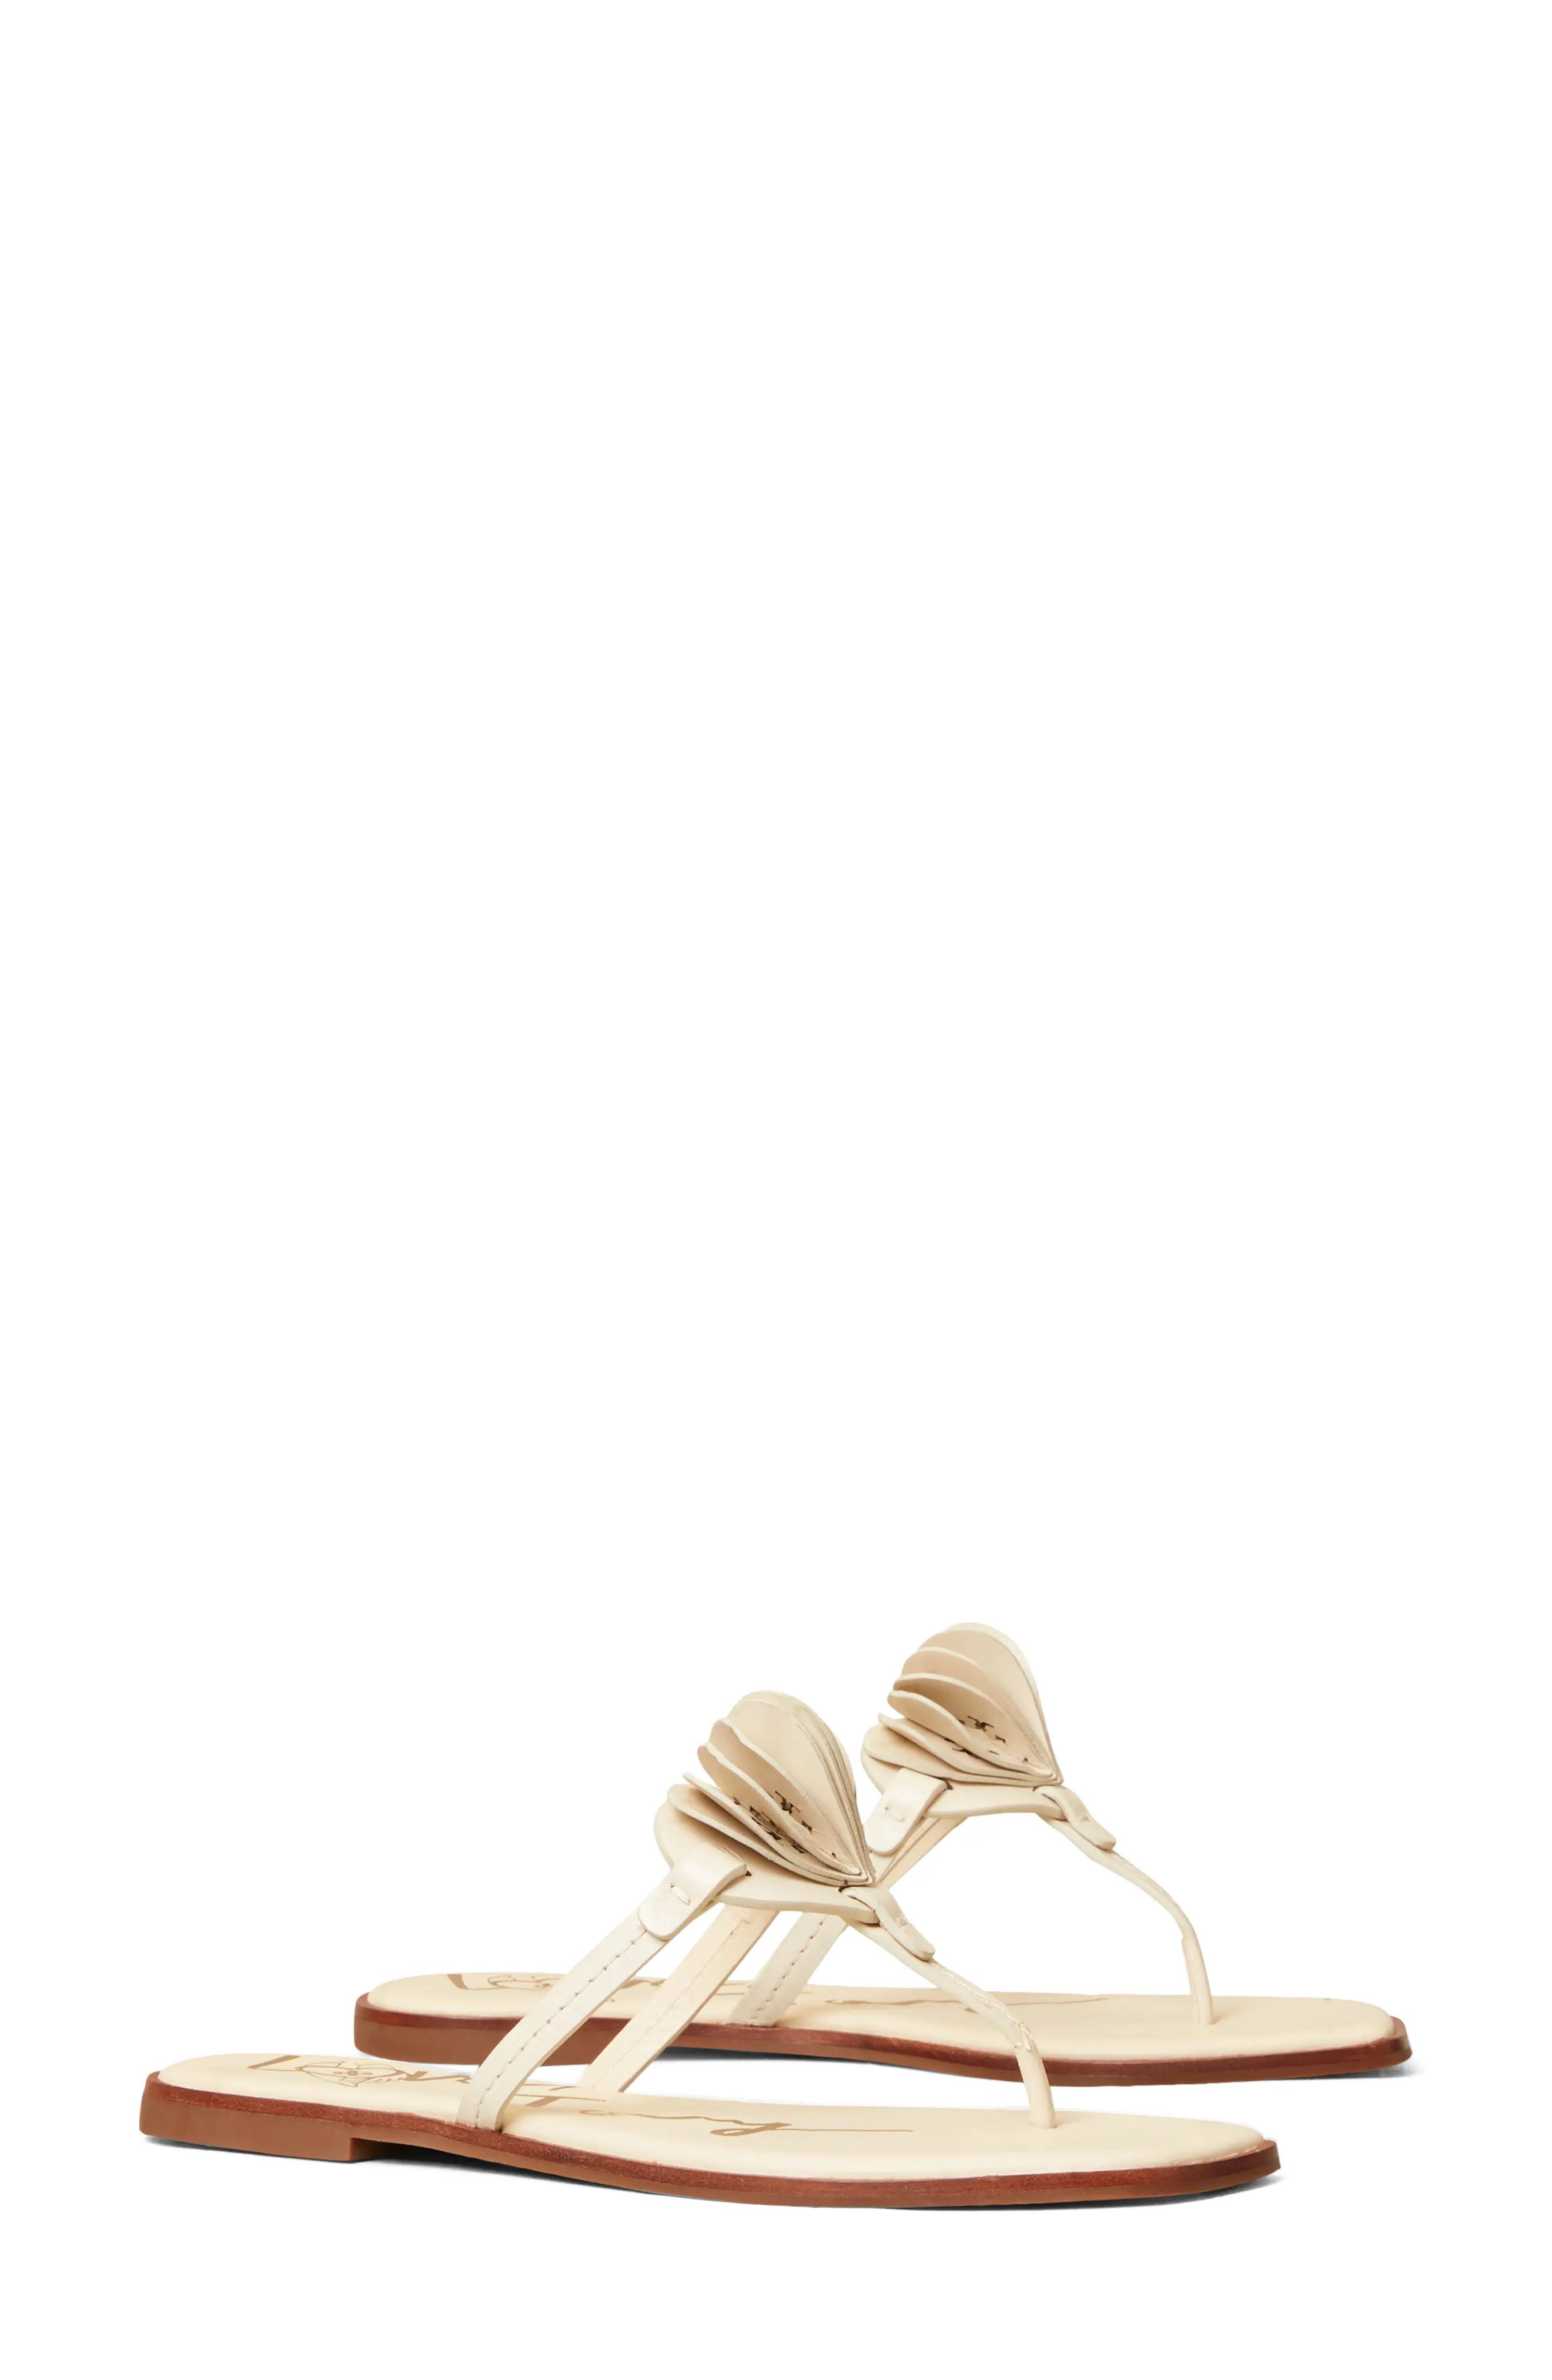 Tory Burch Heart Flip Flop, Size 7 in New Cream at Nordstrom | Nordstrom